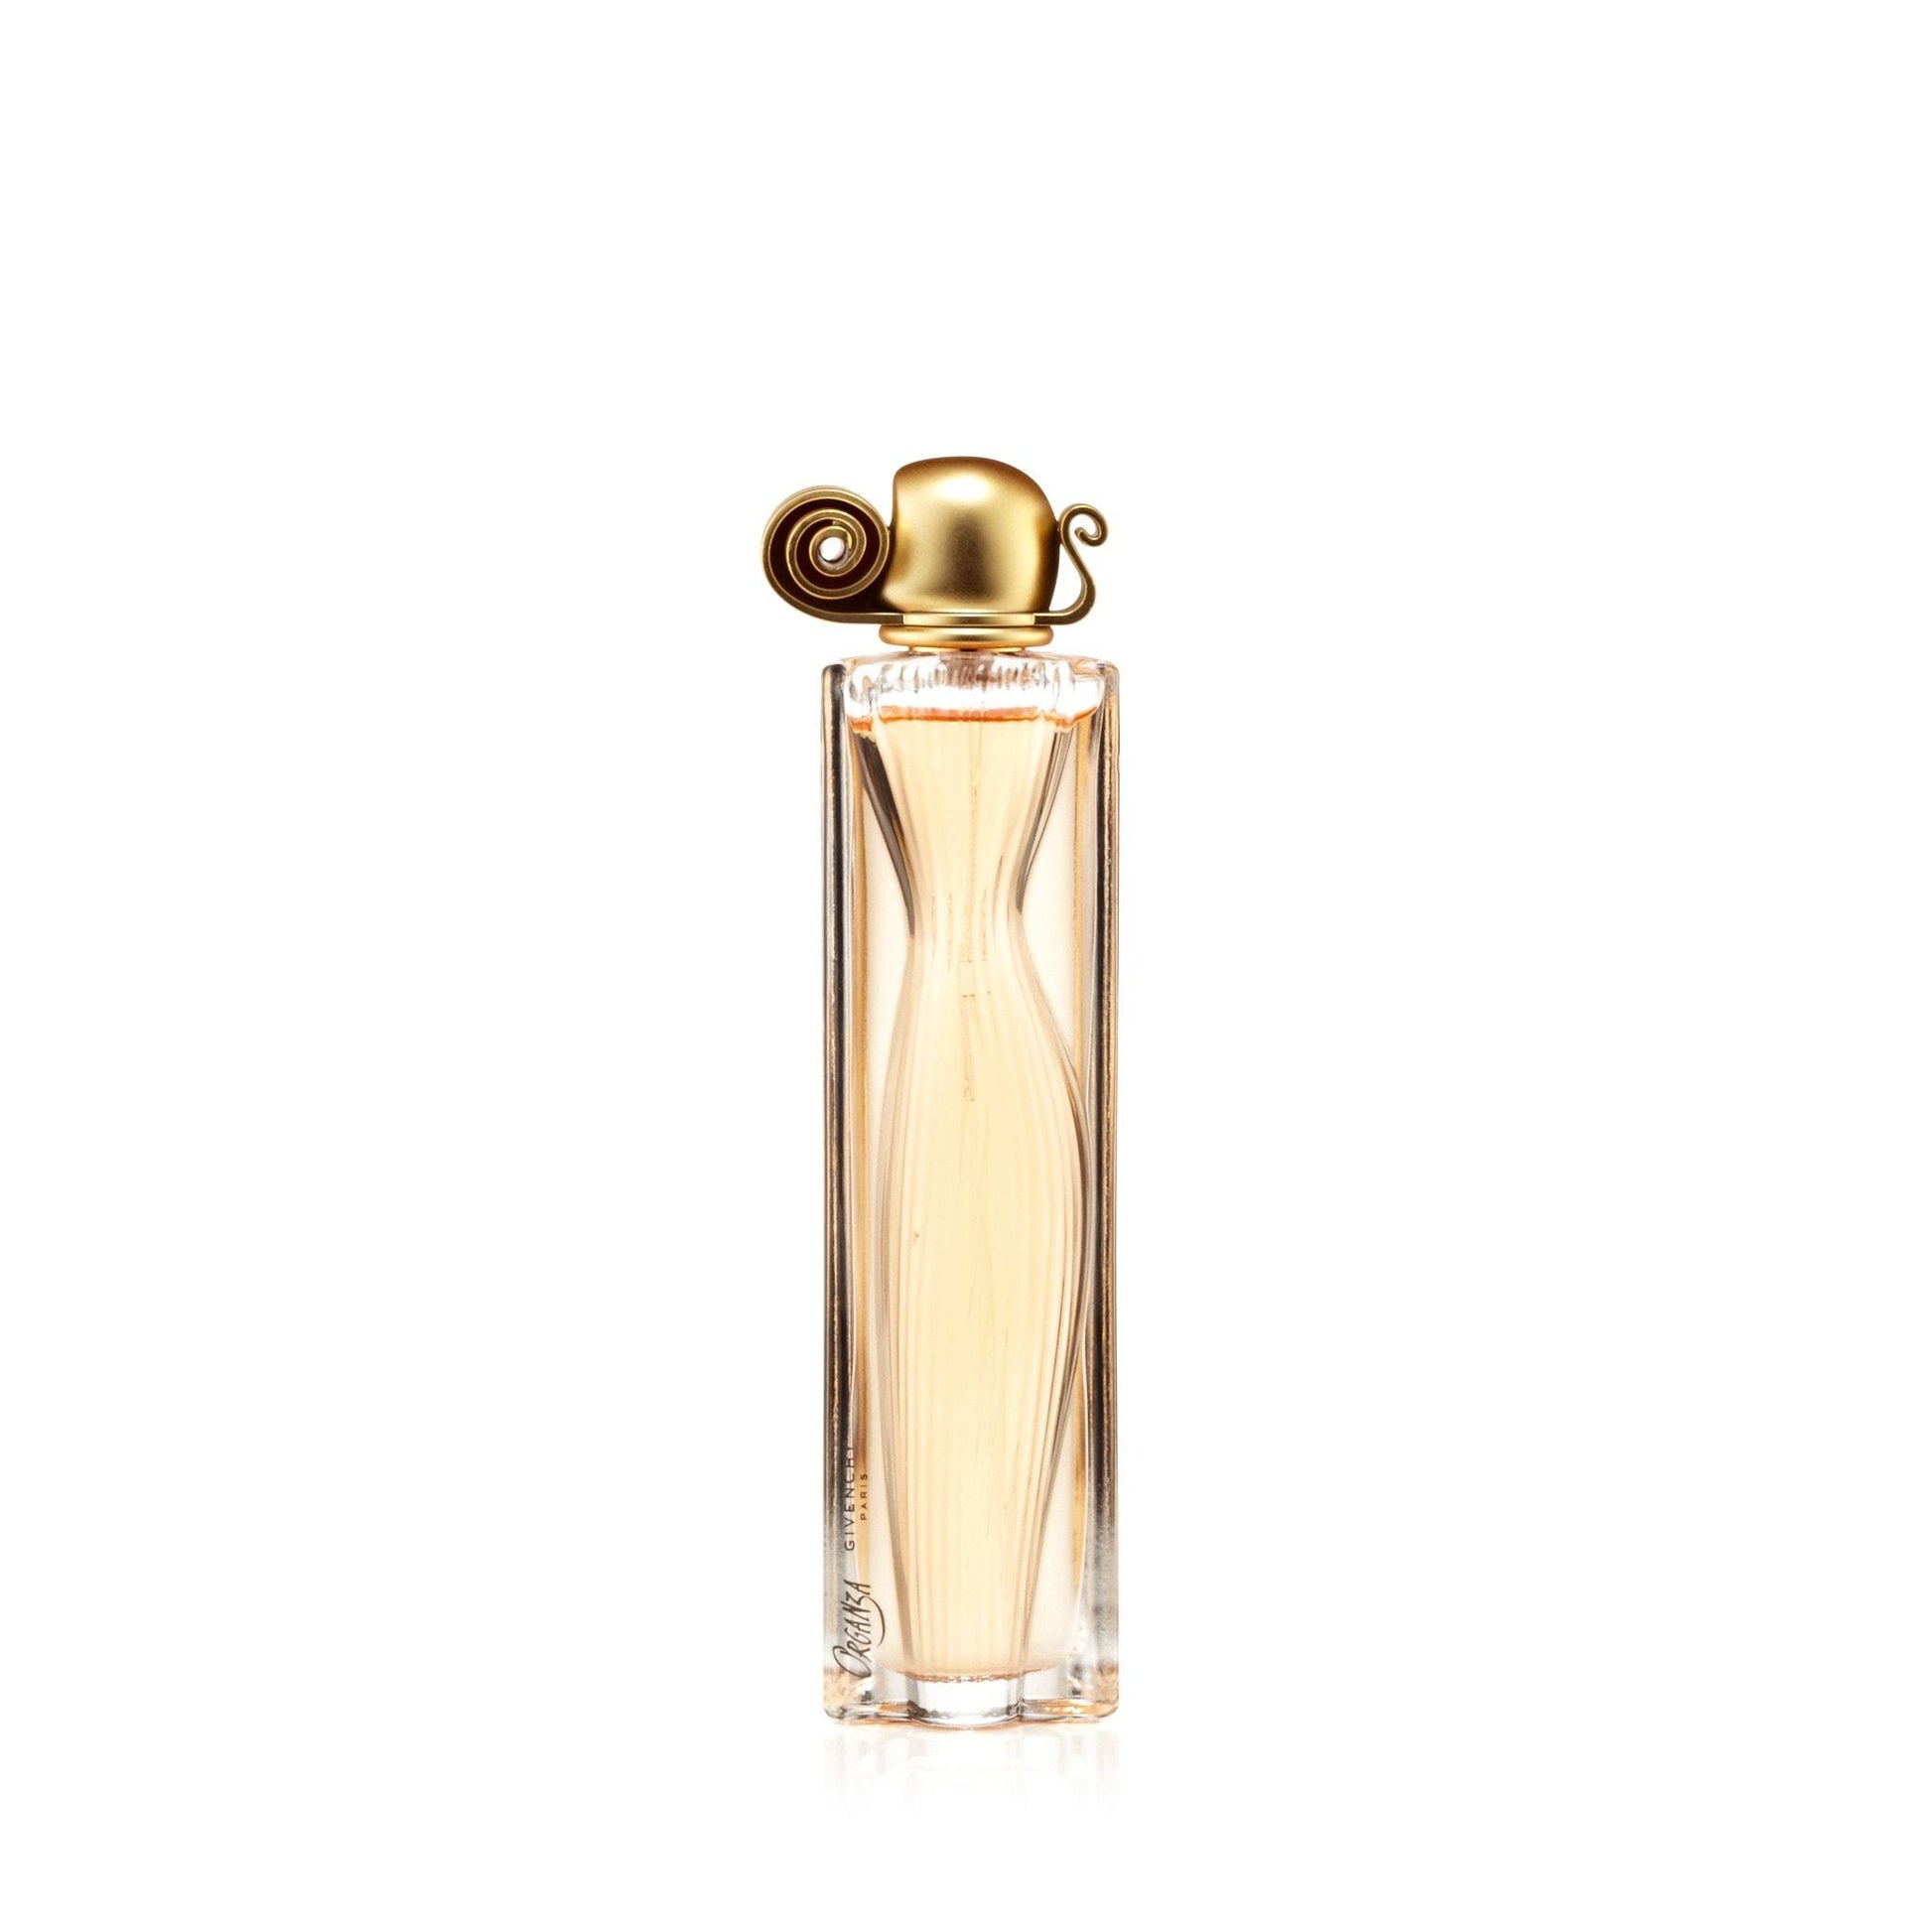 Organza Eau de Parfum Spray for Women by Givenchy, Product image 4